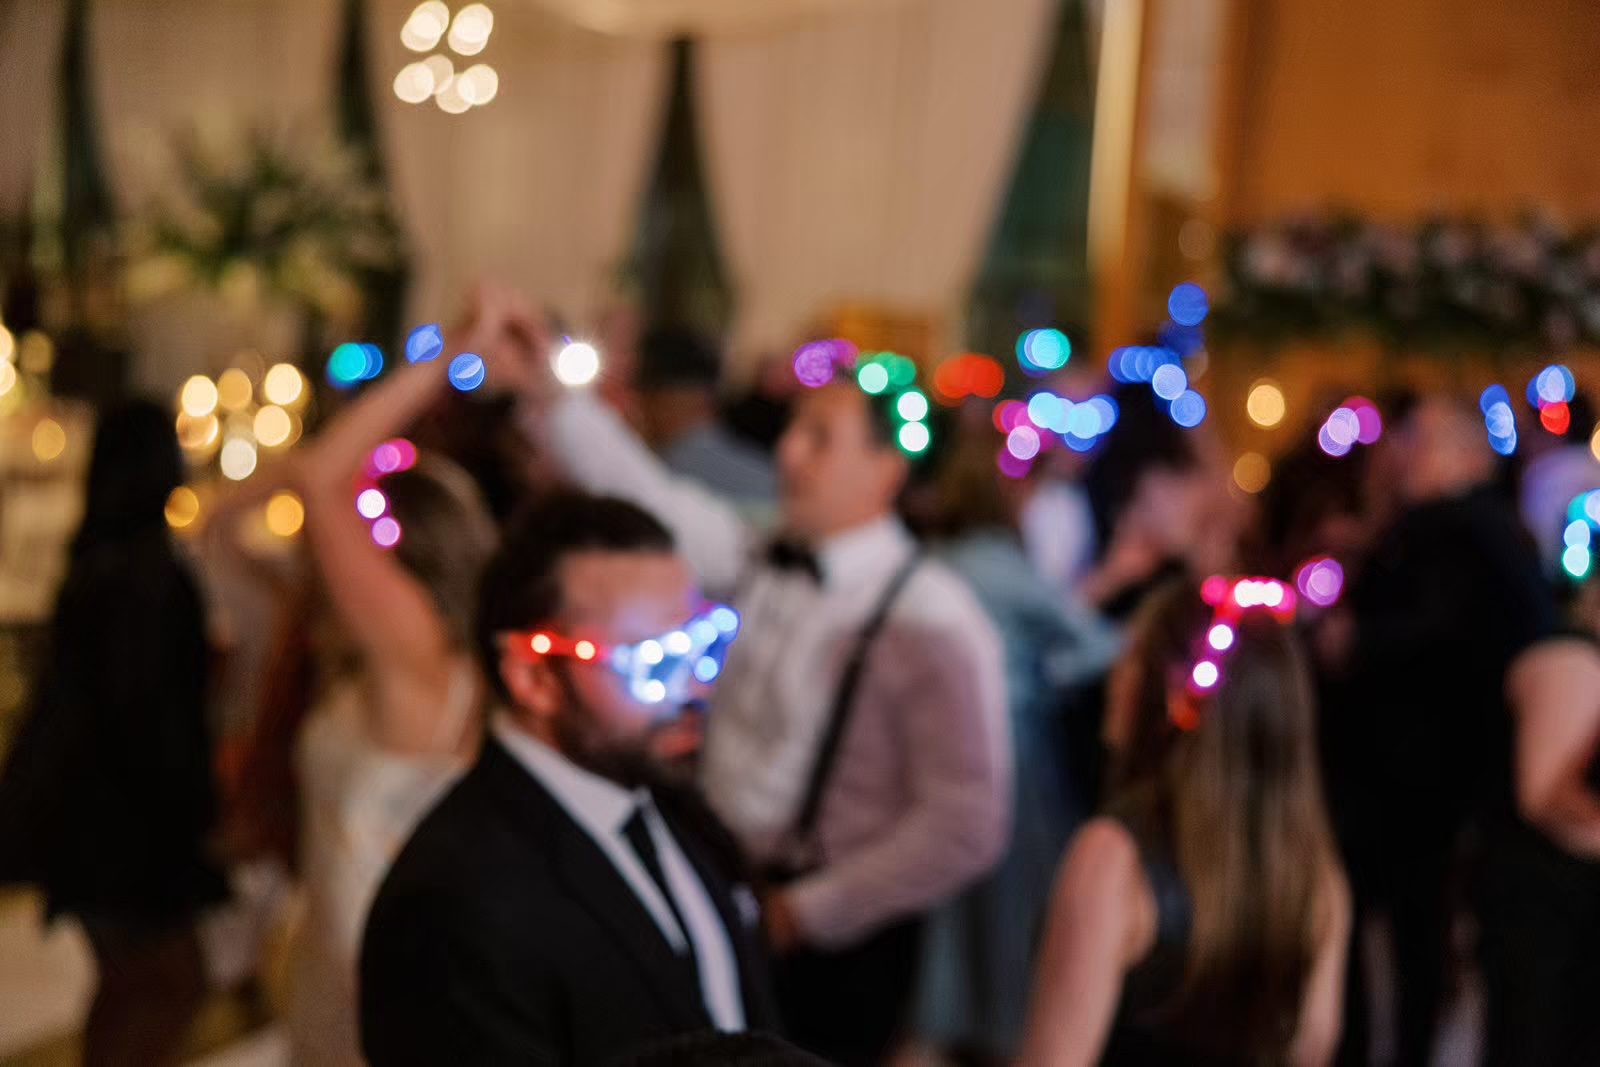 Guests dancing with glow sticks at the Peninsula Chicago wedding reception